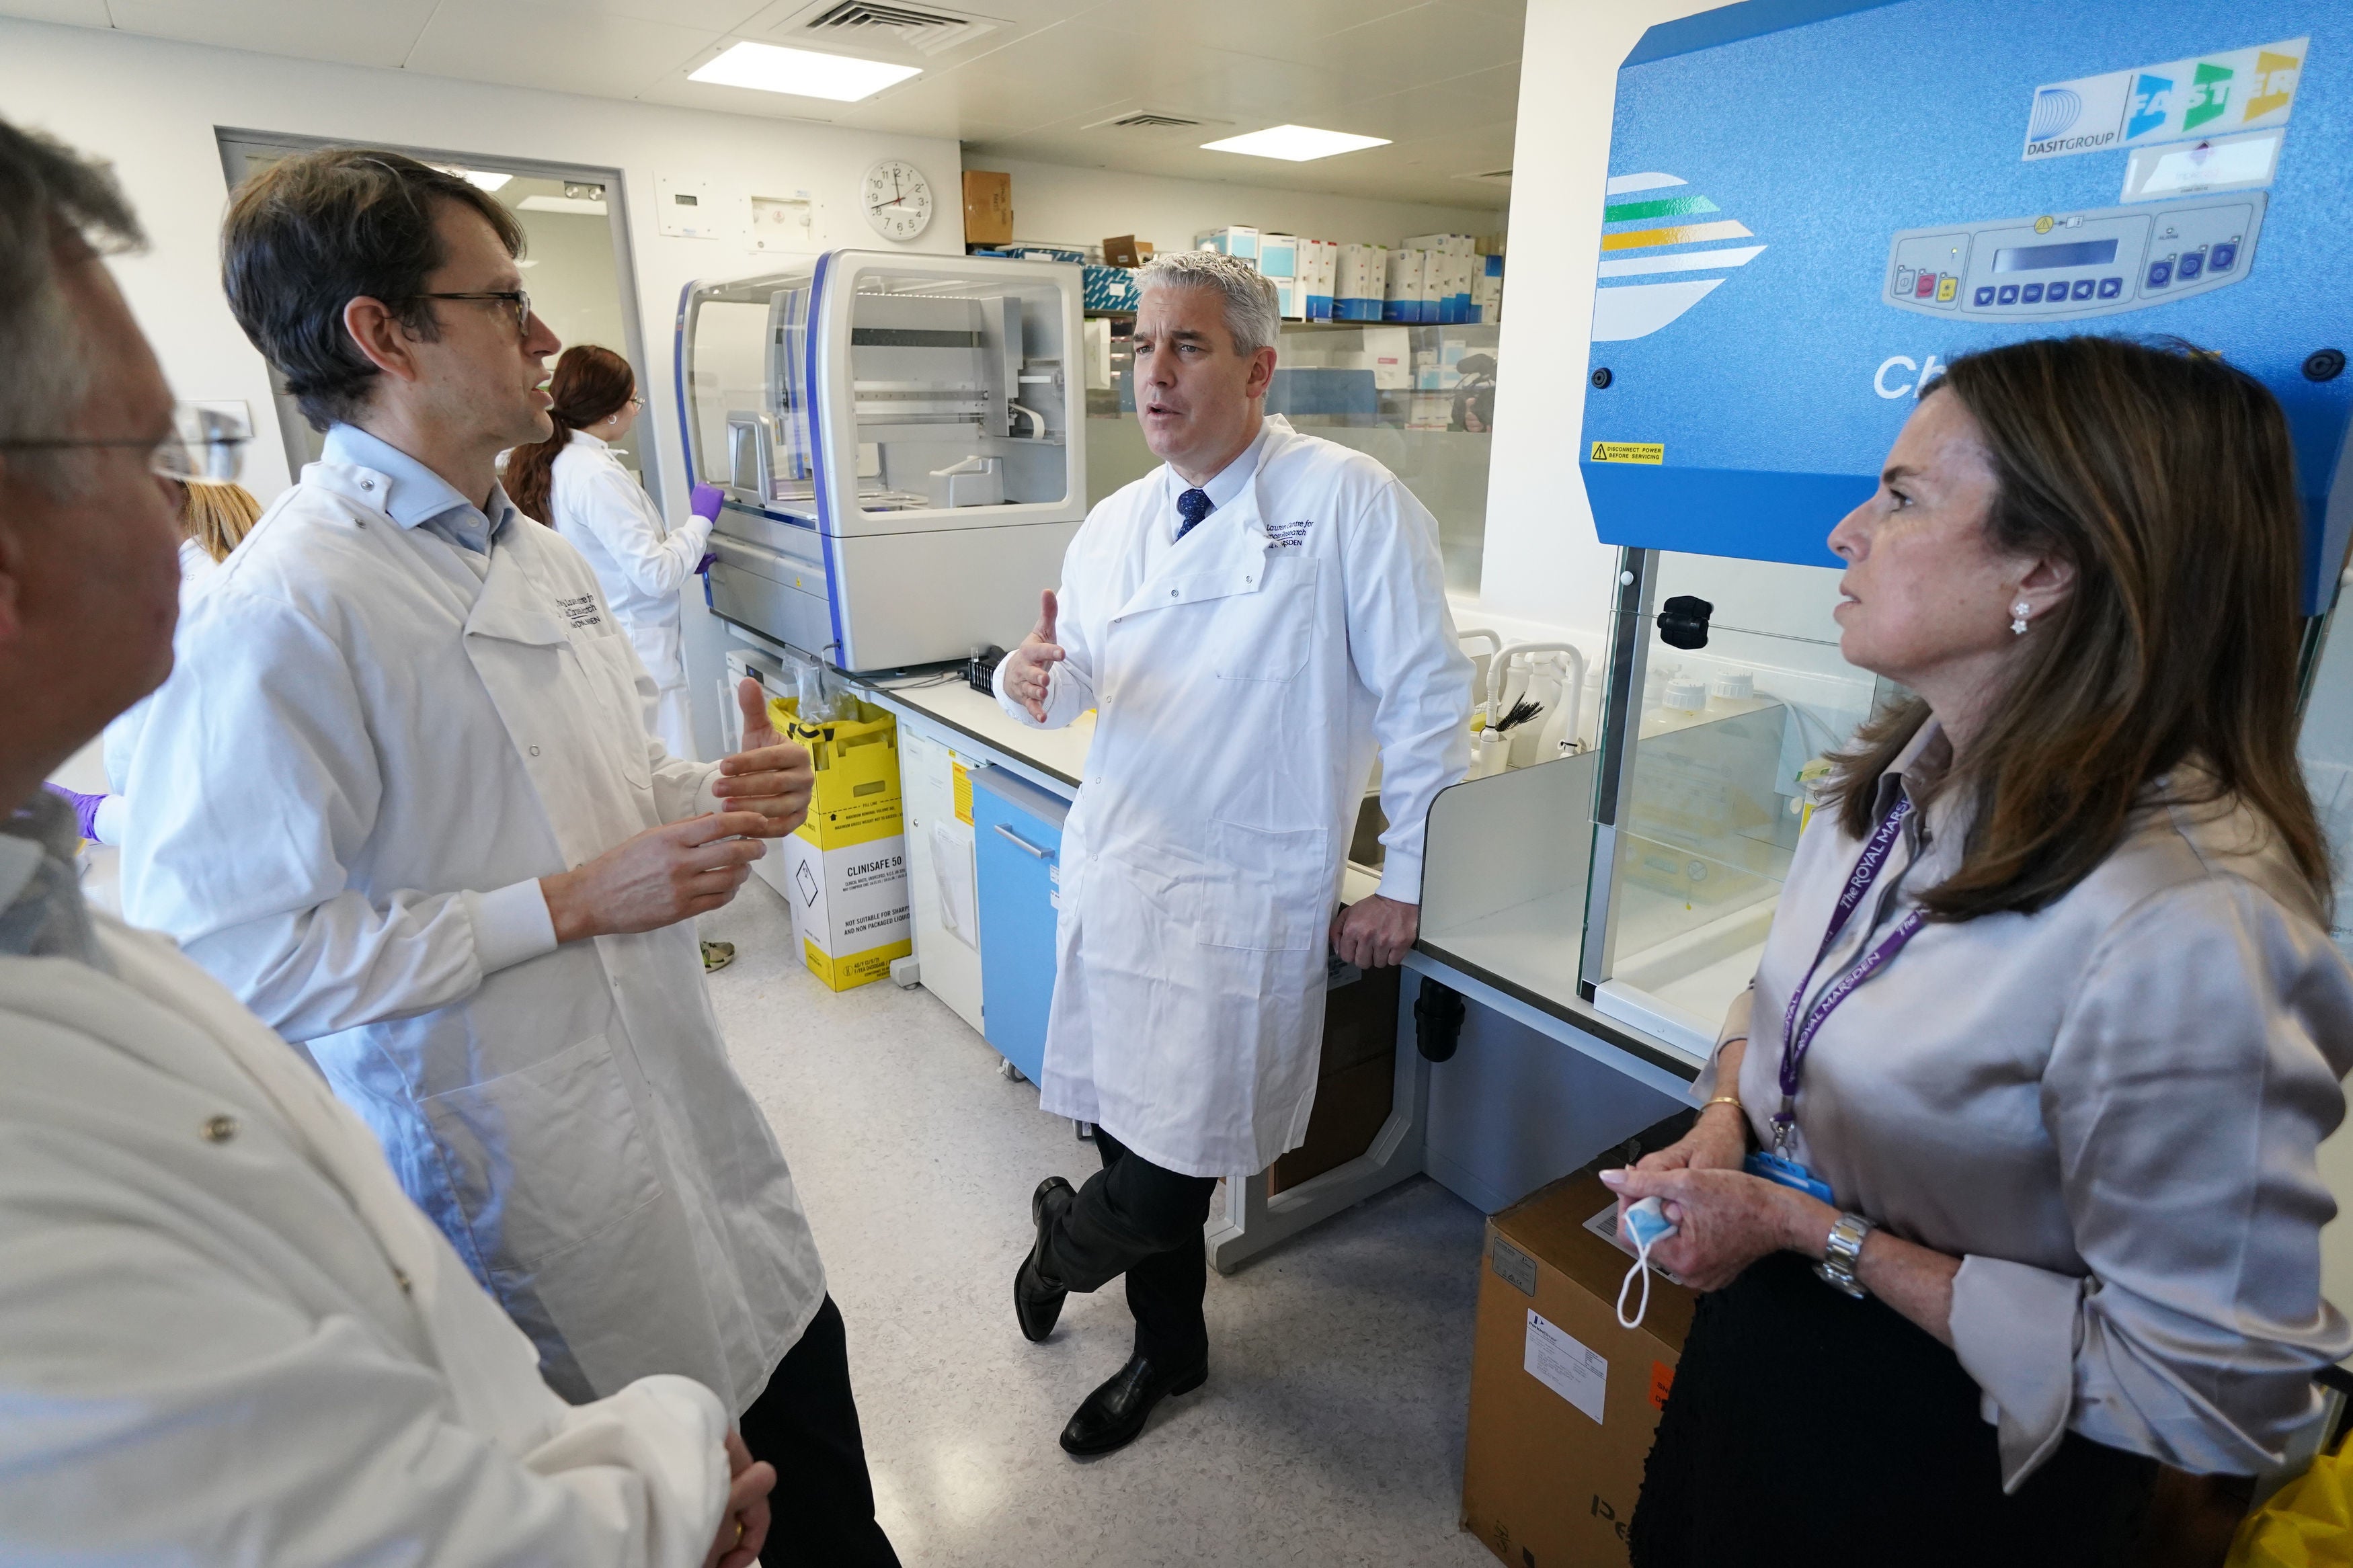 Health Secretary Steve Barclay at the Ralph Lauren Centre for Breast Cancer Research during a visit to the Royal Marsden Hospital